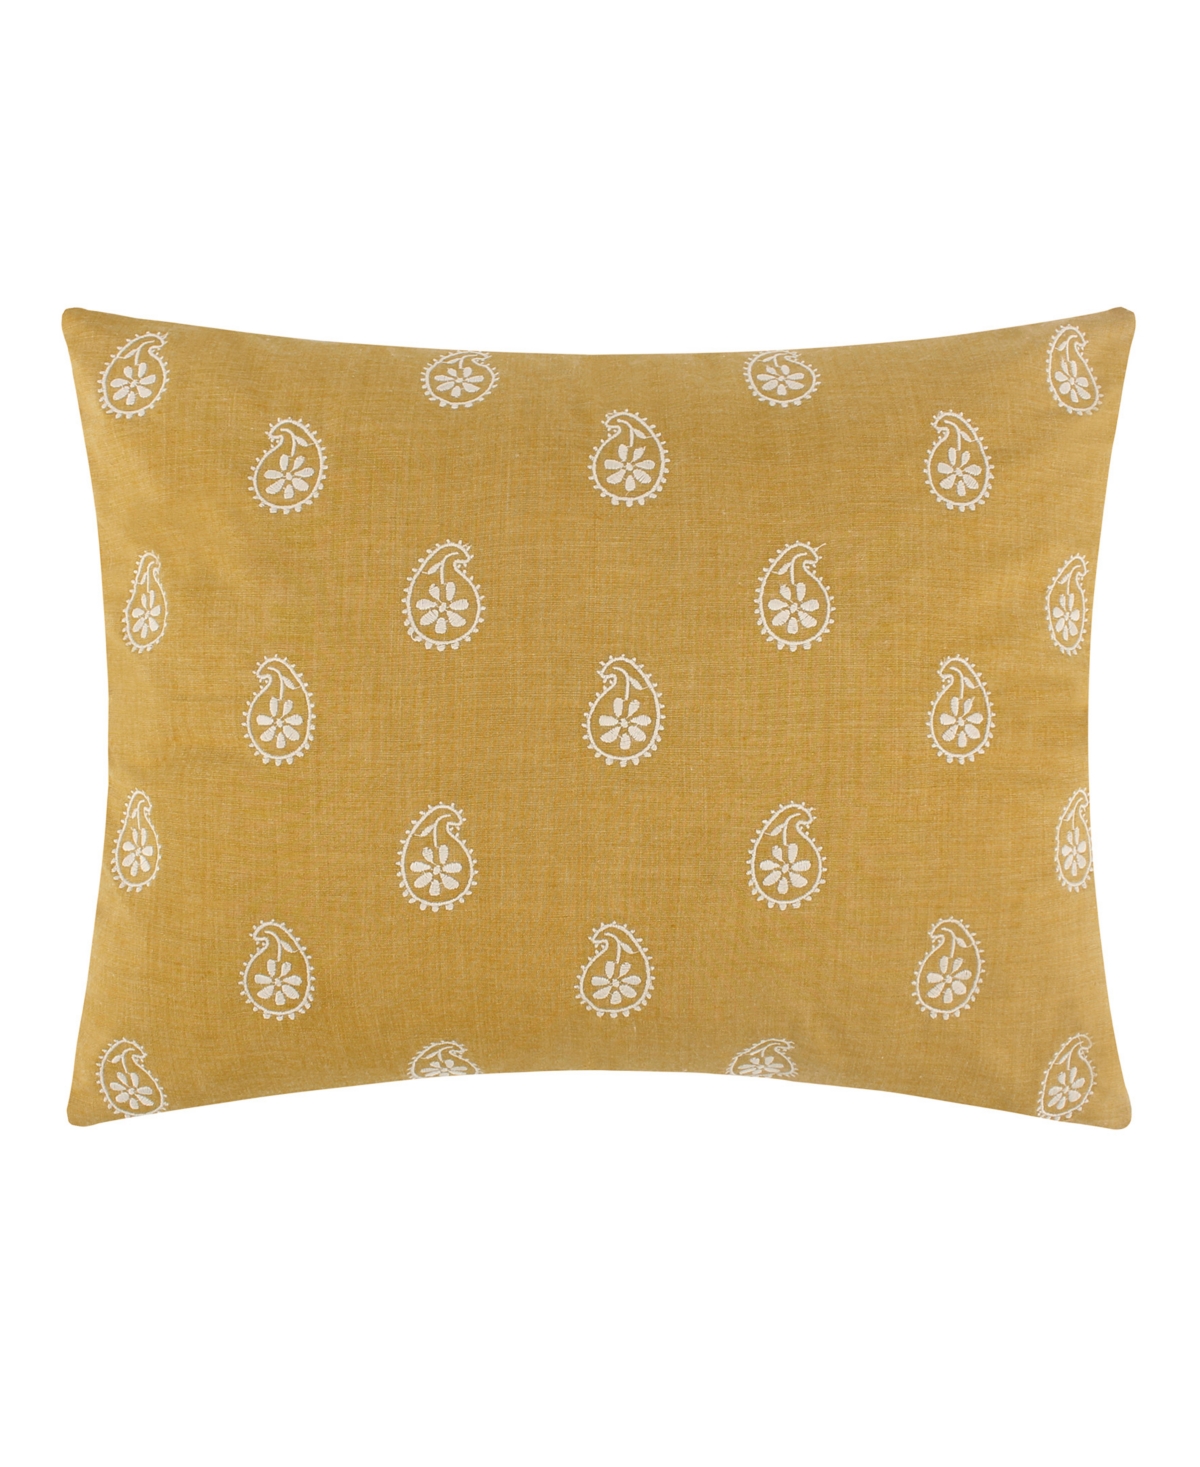 Levtex Khotan Embroidered Decorative Pillow, 18" X 14" In Yellow